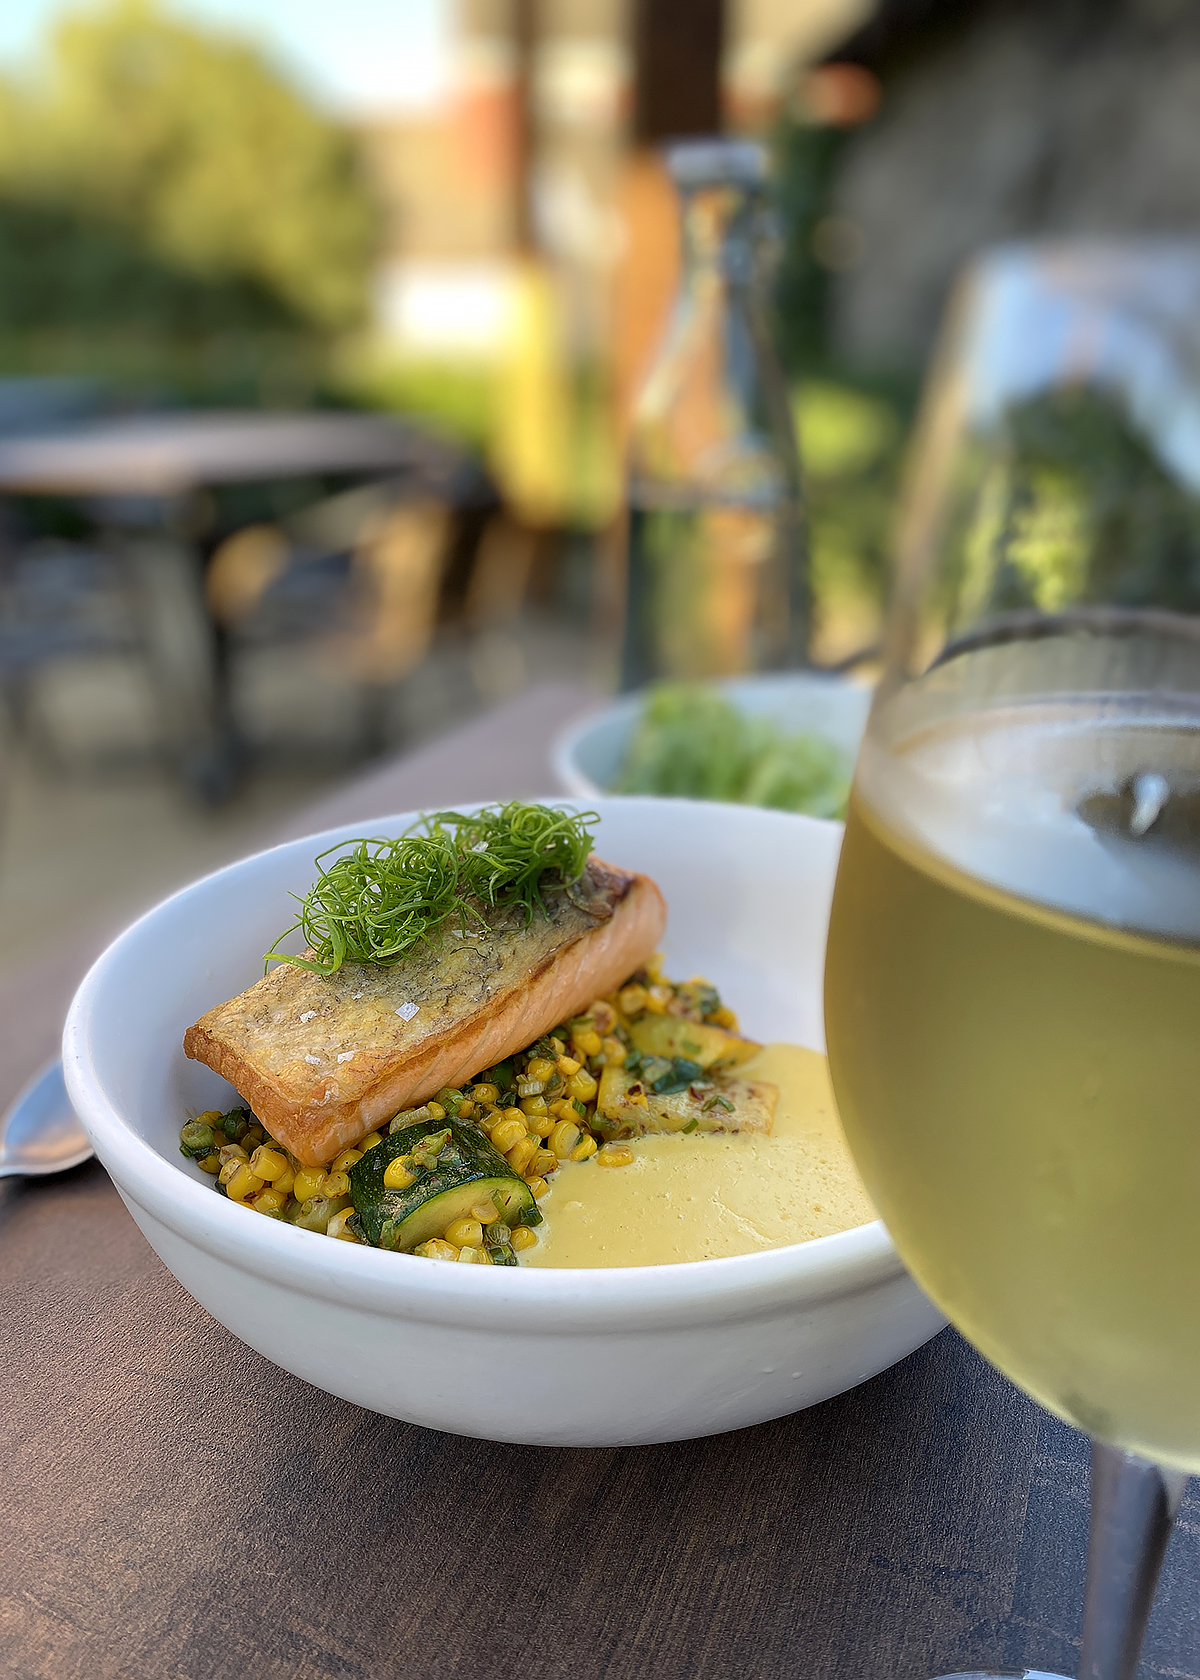 seared salmon with crispy skin on corn and summer squash, paired with white wine